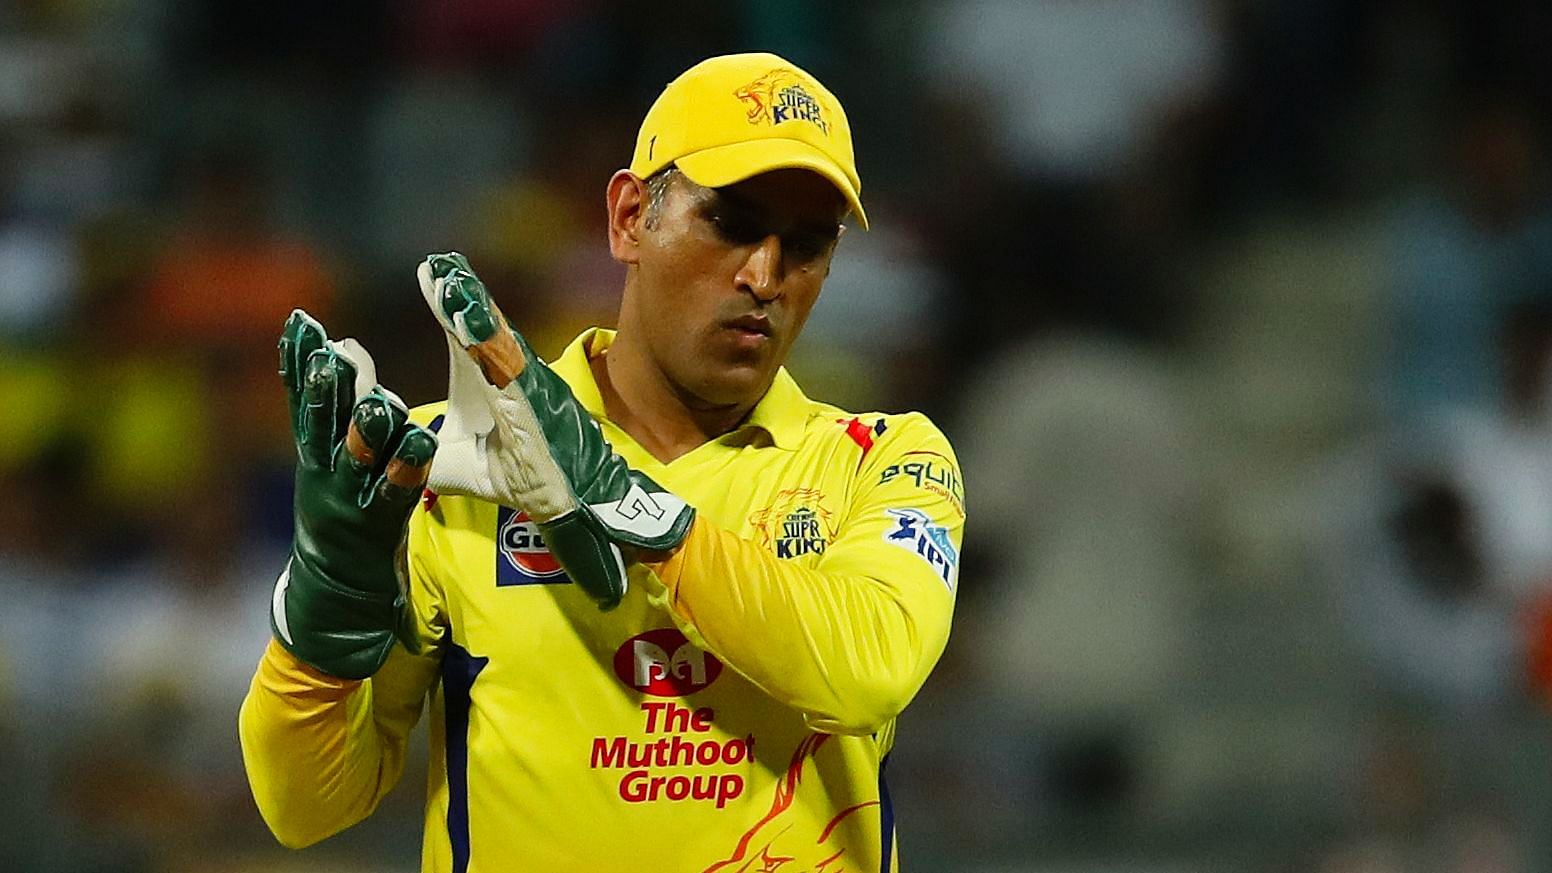 In ‘Roar of the Lion’, MS Dhoni narrates the story of CSK’s successful comeback in IPL 2018.